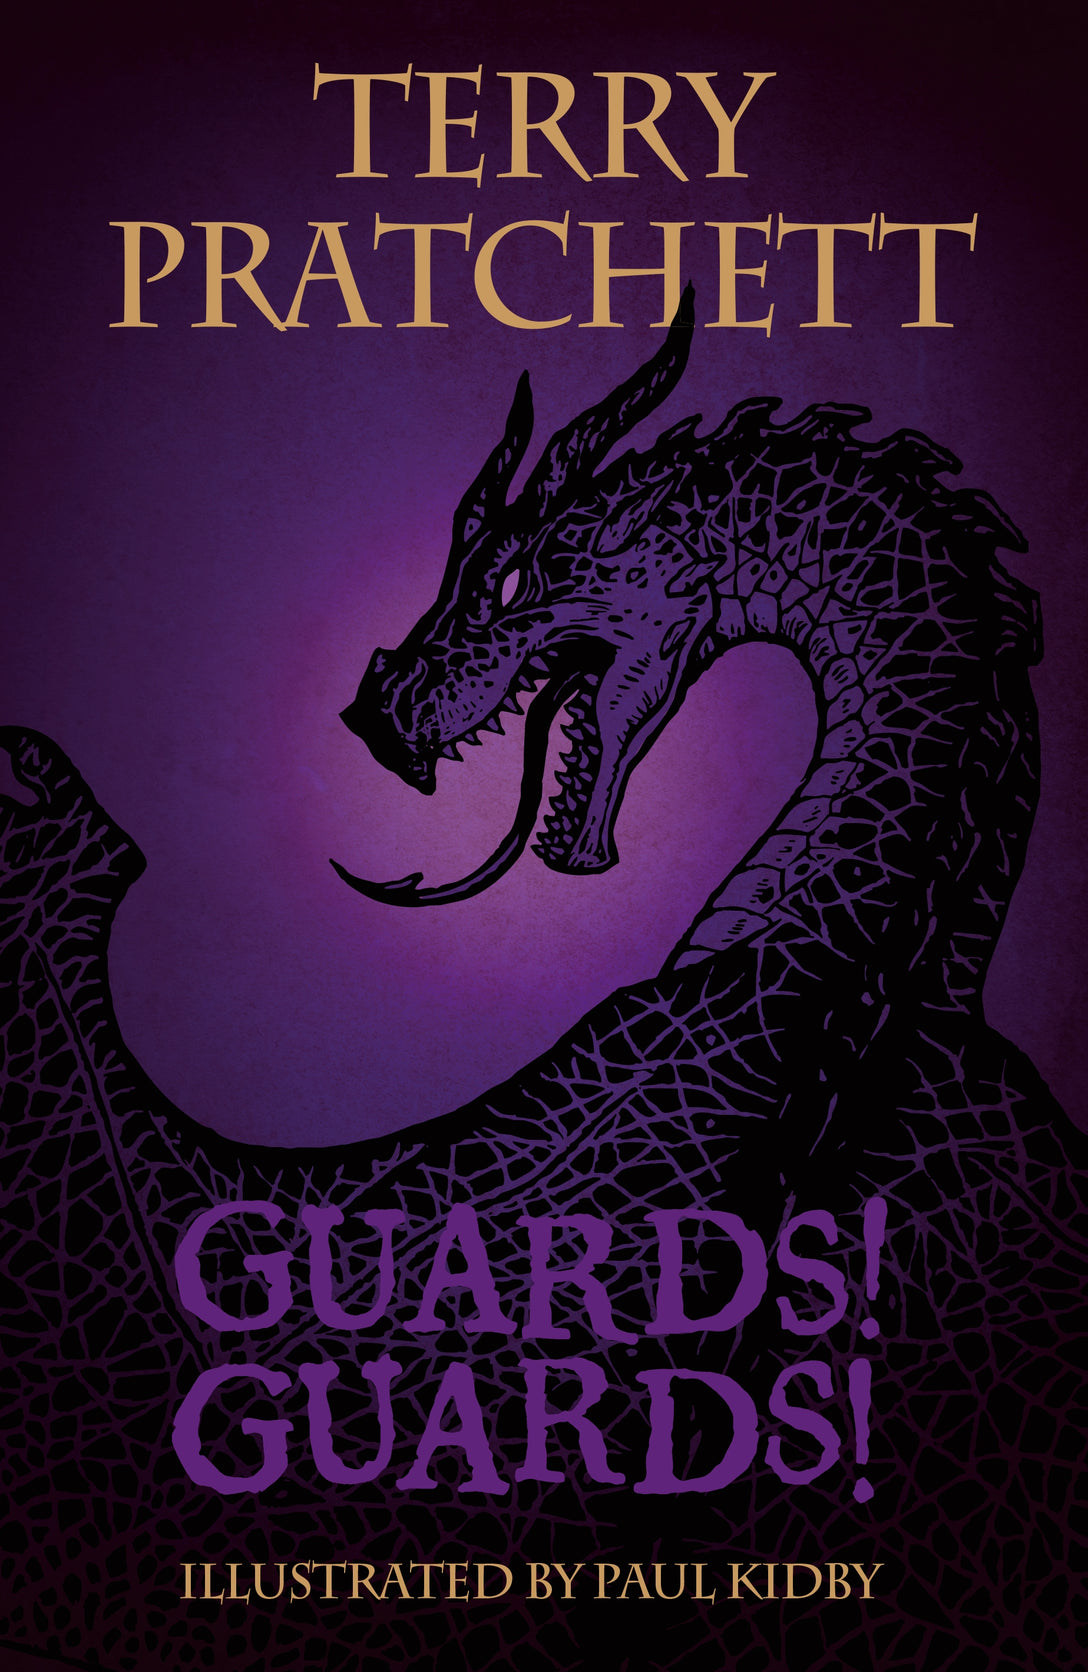 The Illustrated Guards! Guards! by Terry Pratchett